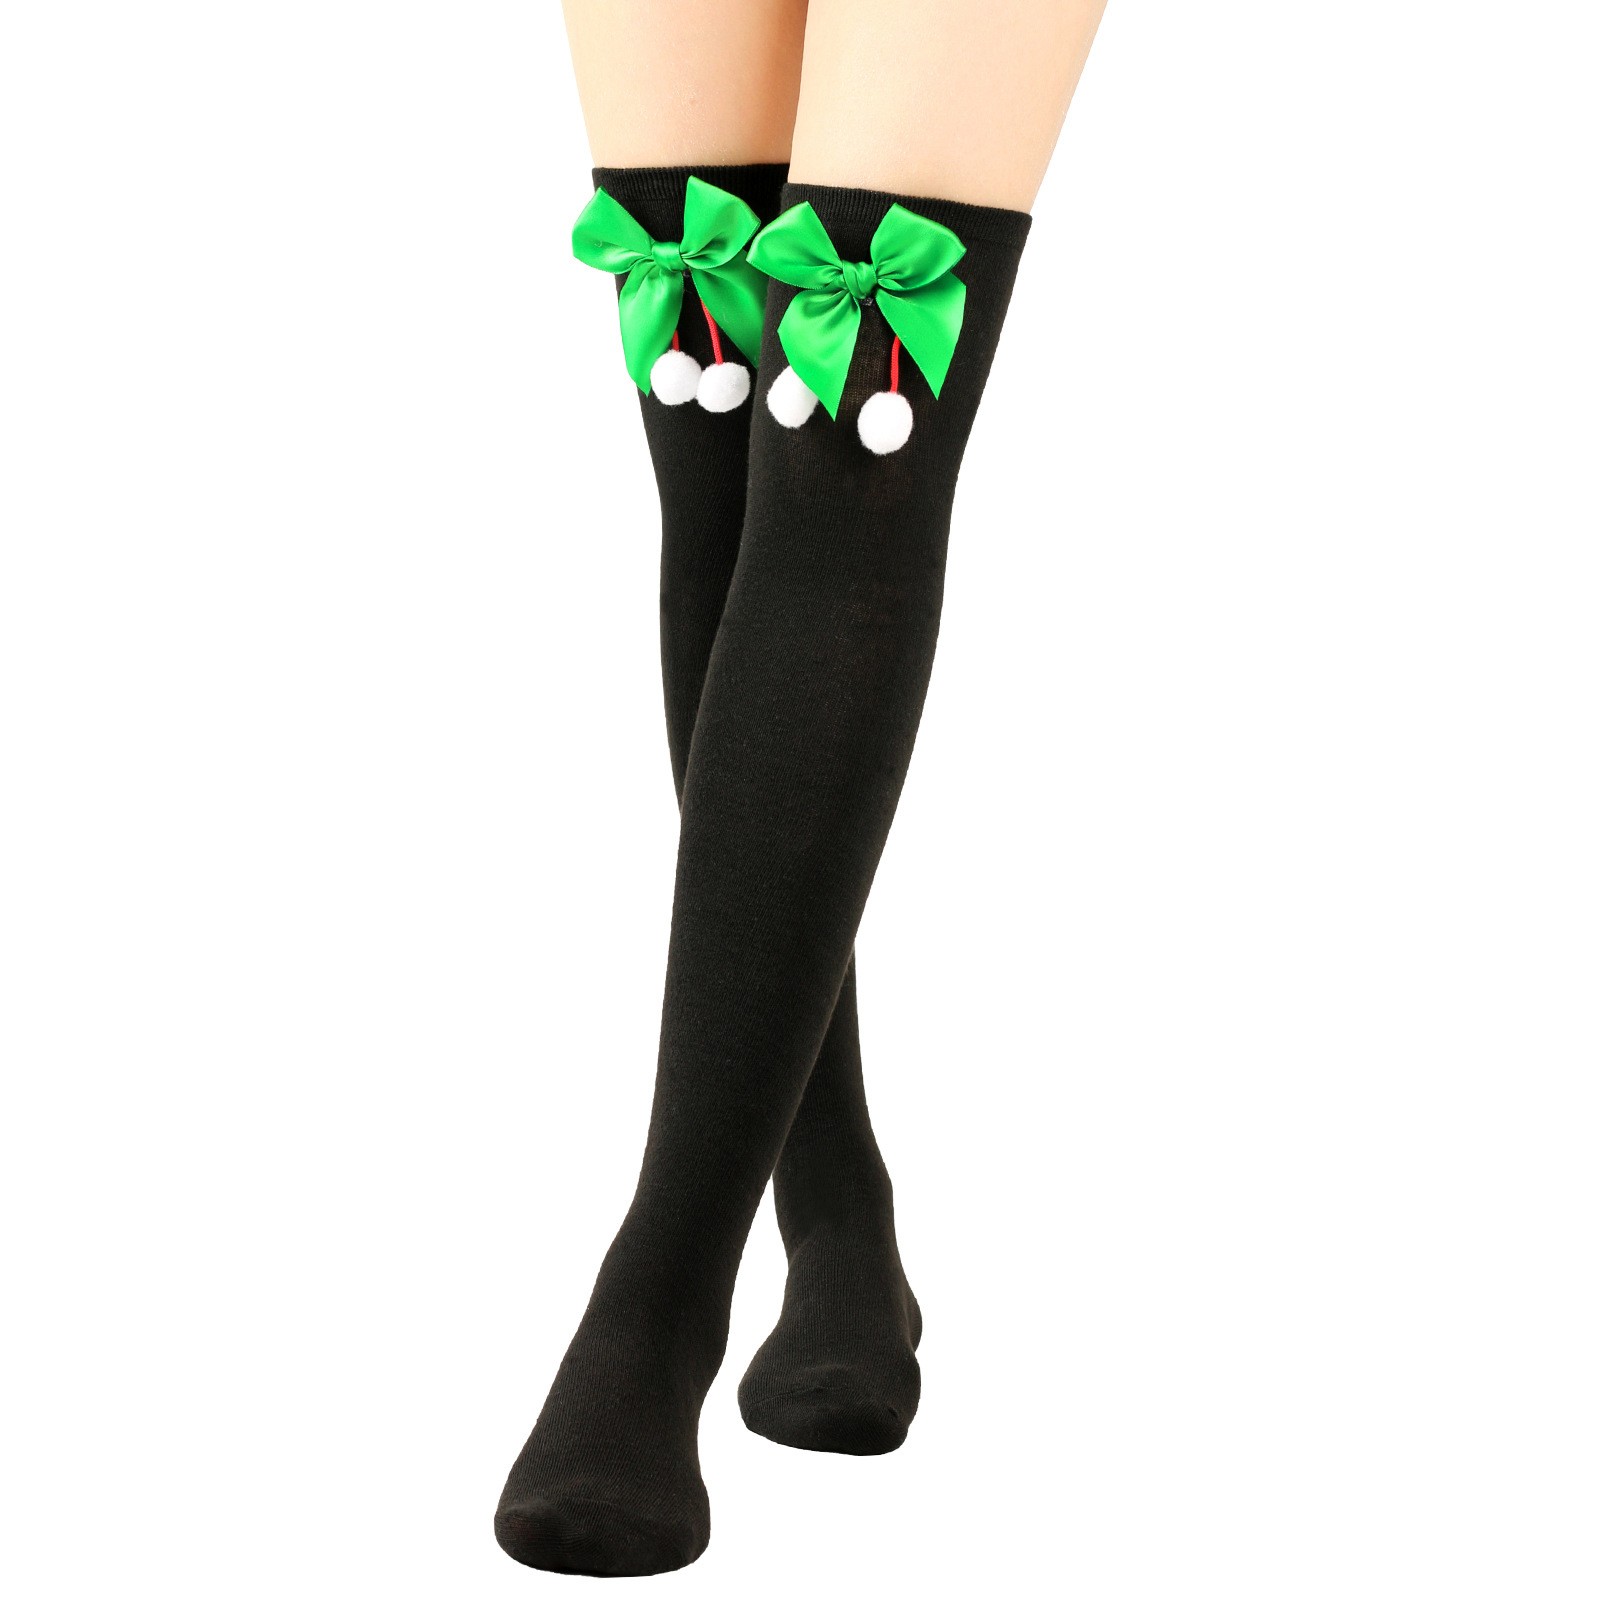 Ladies Solid Color Cartoon Christmas Decorated Knee Socks For Christmas Party Sweet Cute Stockings Tights Fishnet